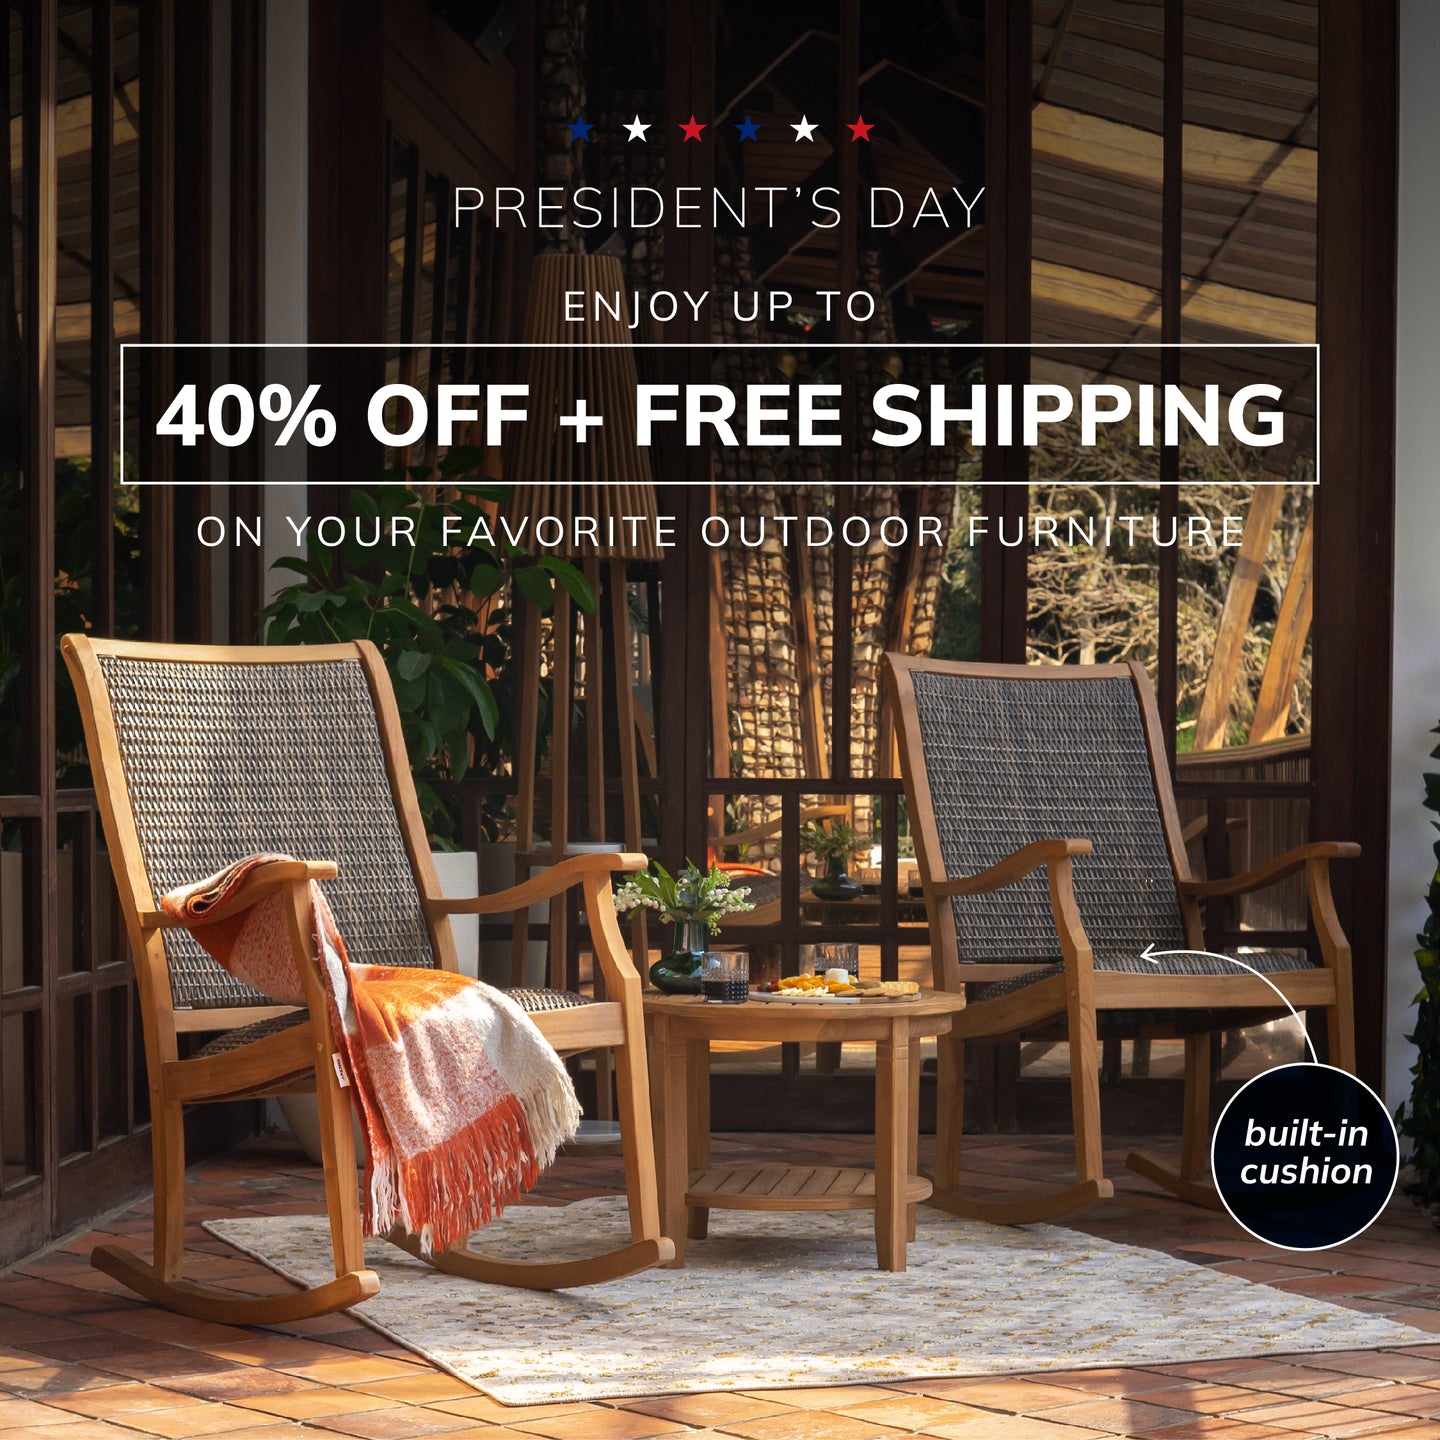 Presidents Day Savings on Teak Patio Furniture: Create a Stylish and Functional Outdoor Space with Cambridge Casual Sale